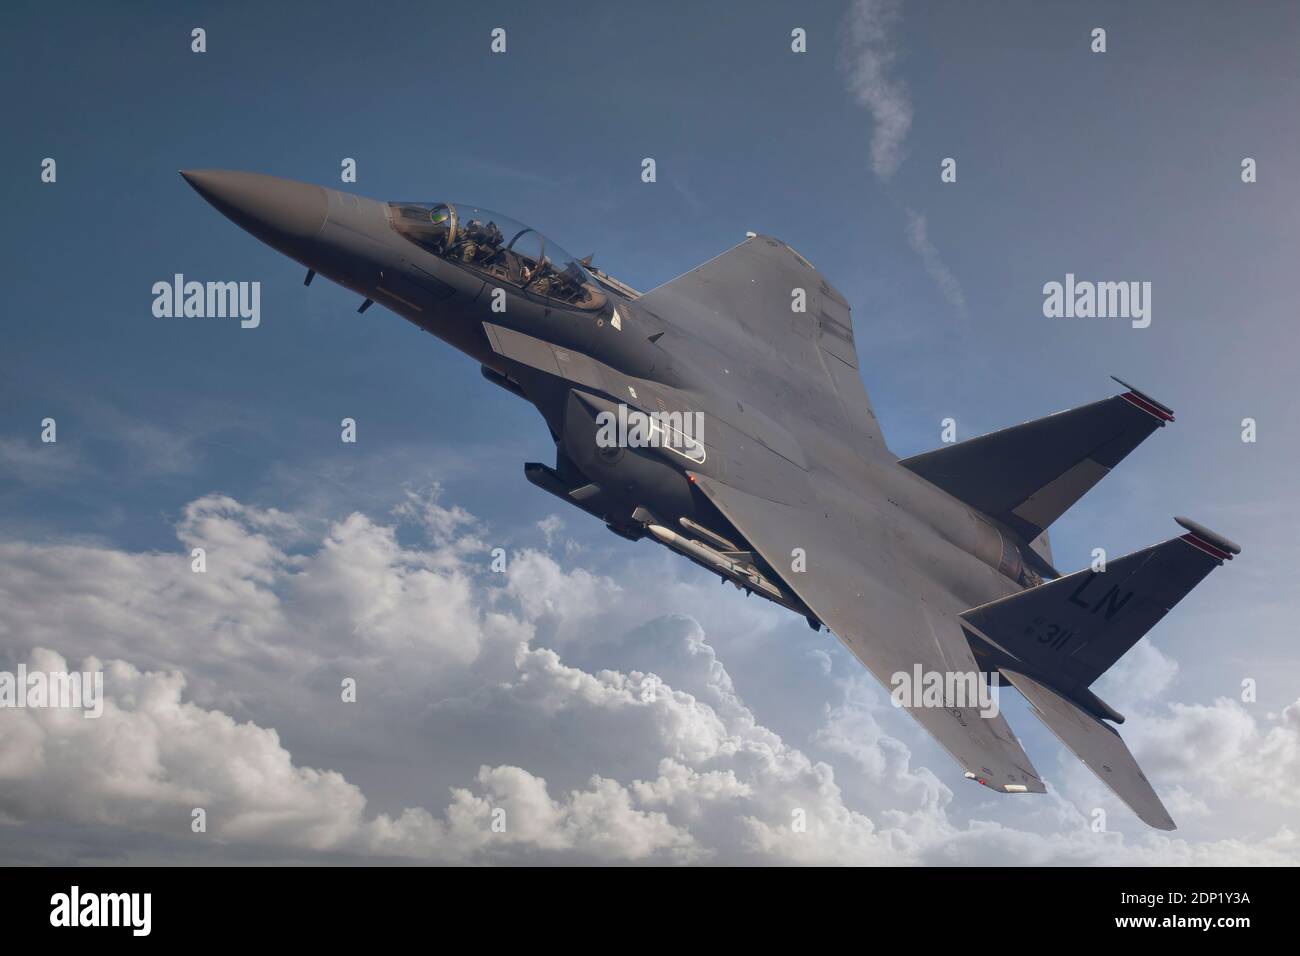 The McDonnell Douglas F-15 Eagle is an American twin-engine, all-weather tactical fighter aircraft designed by McDonnell Douglas. Following reviews of Stock Photo